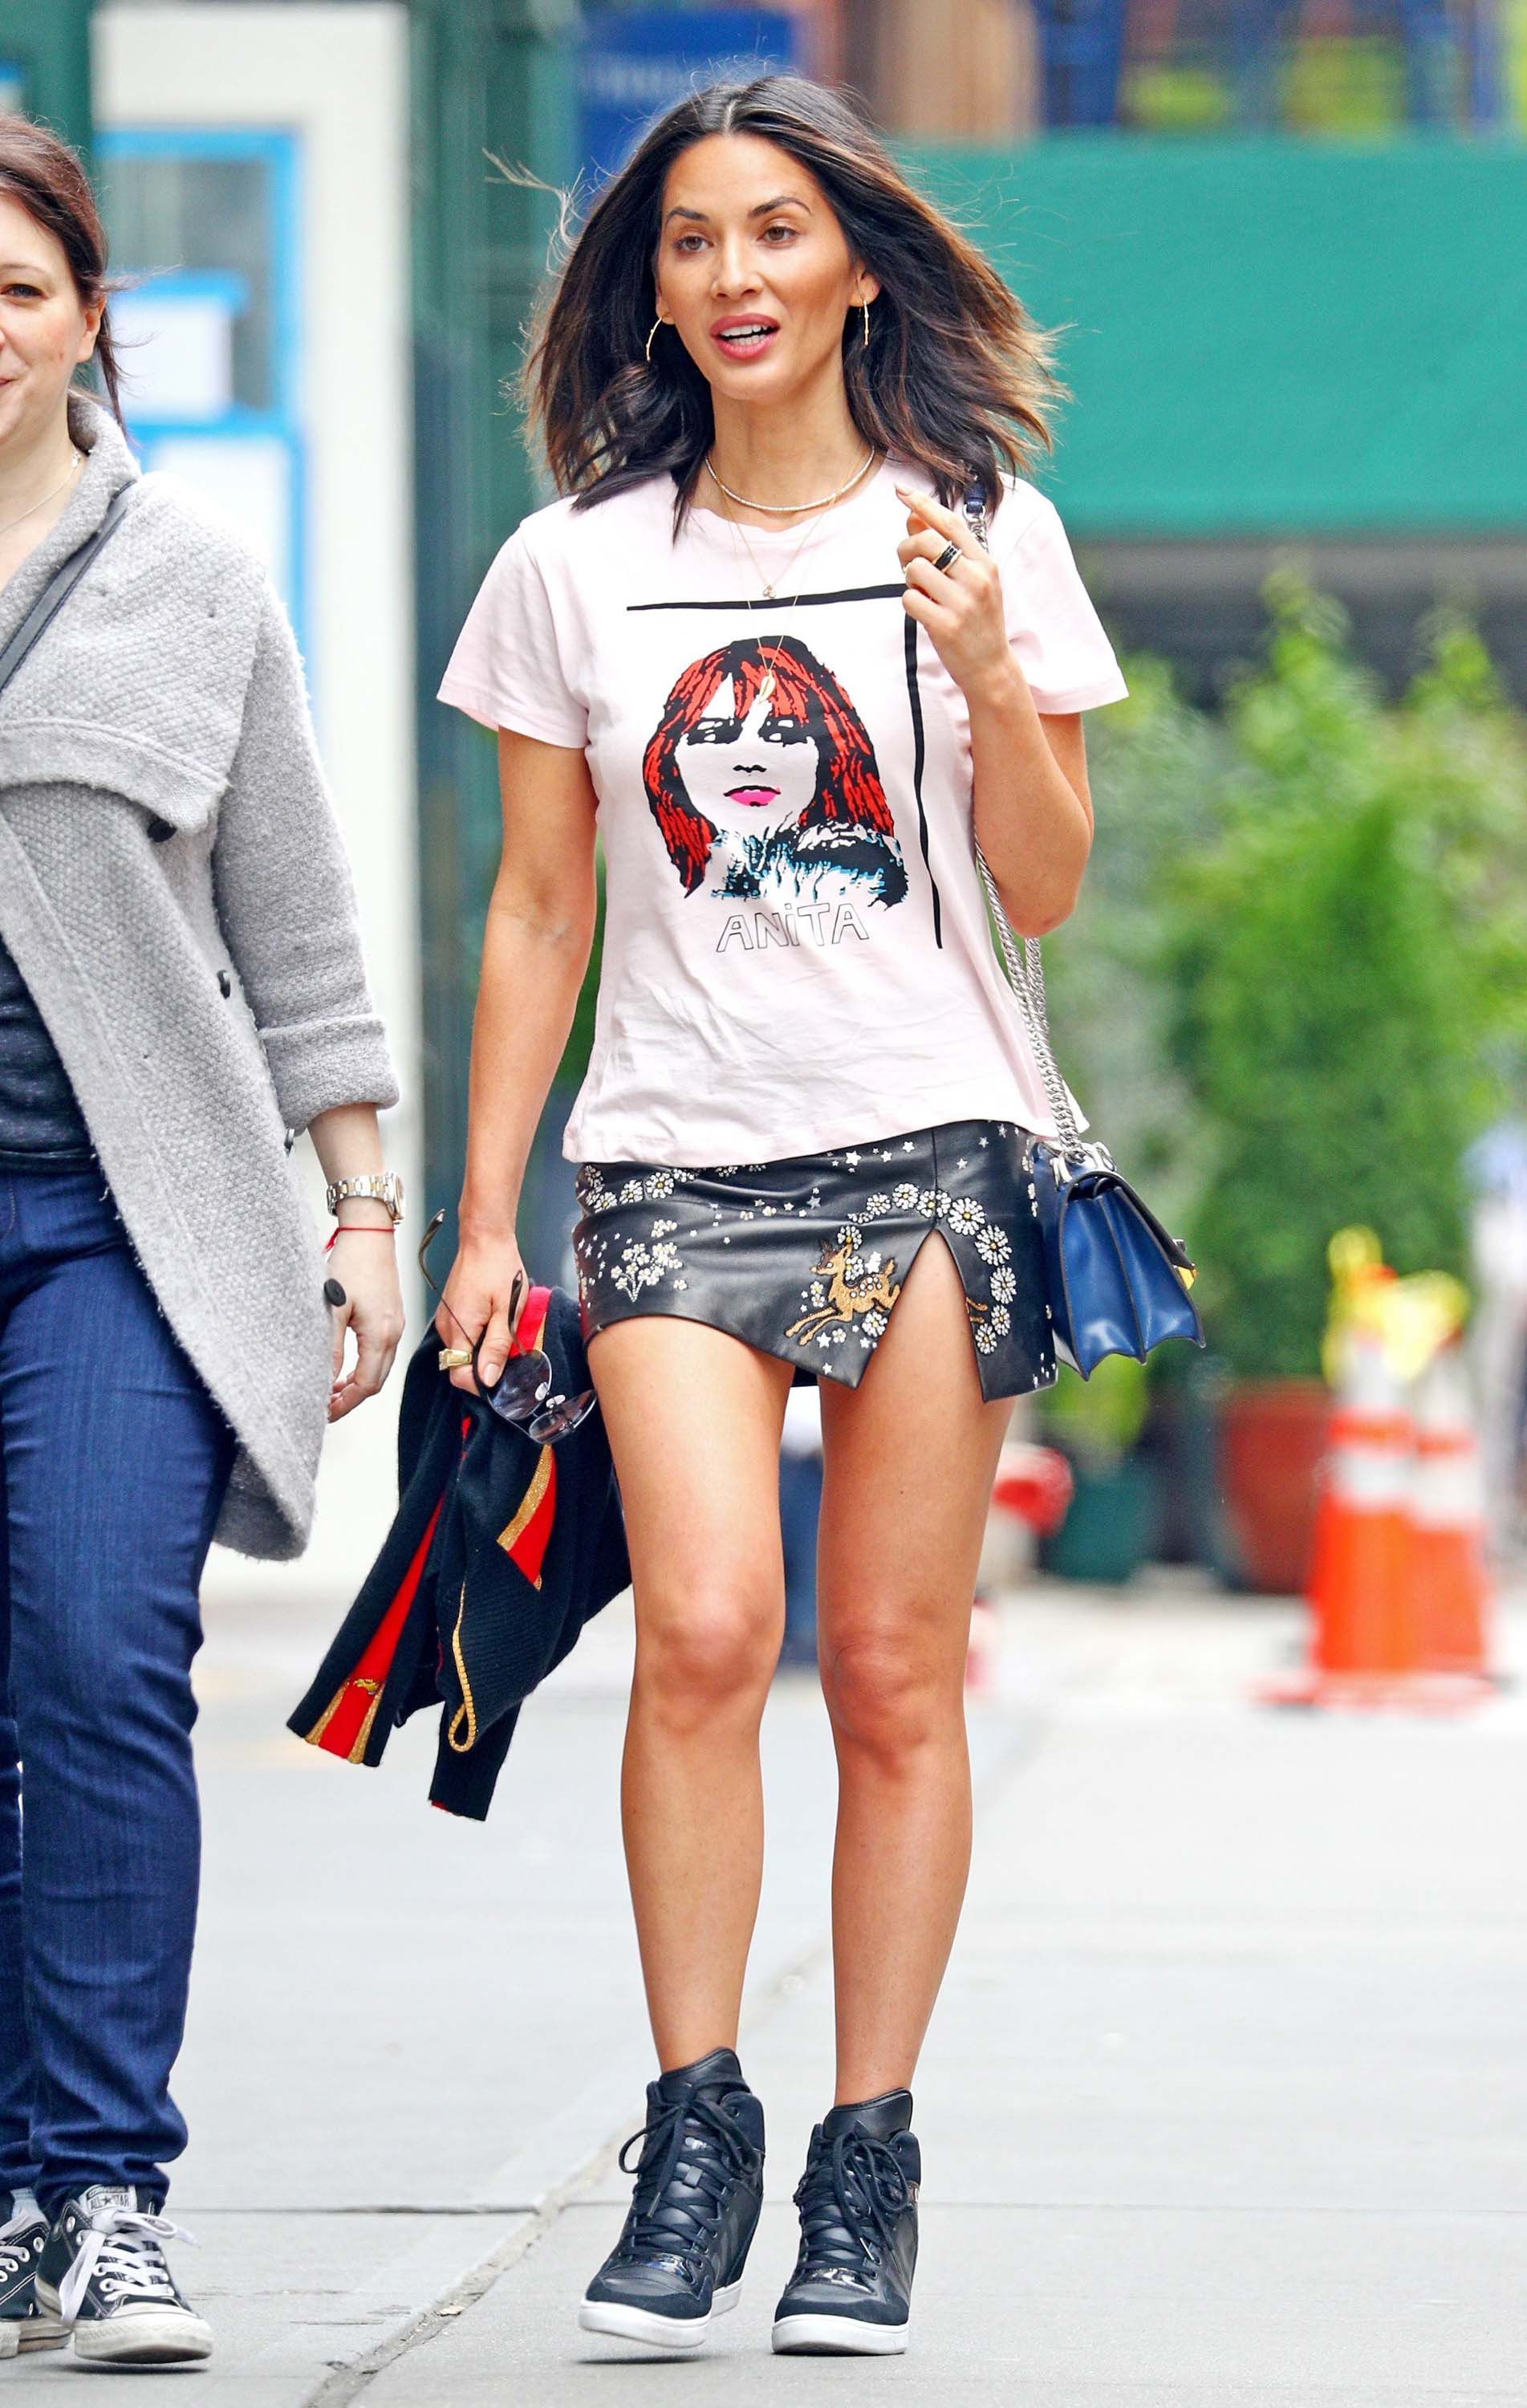 Olivia Munn out and about in NYC